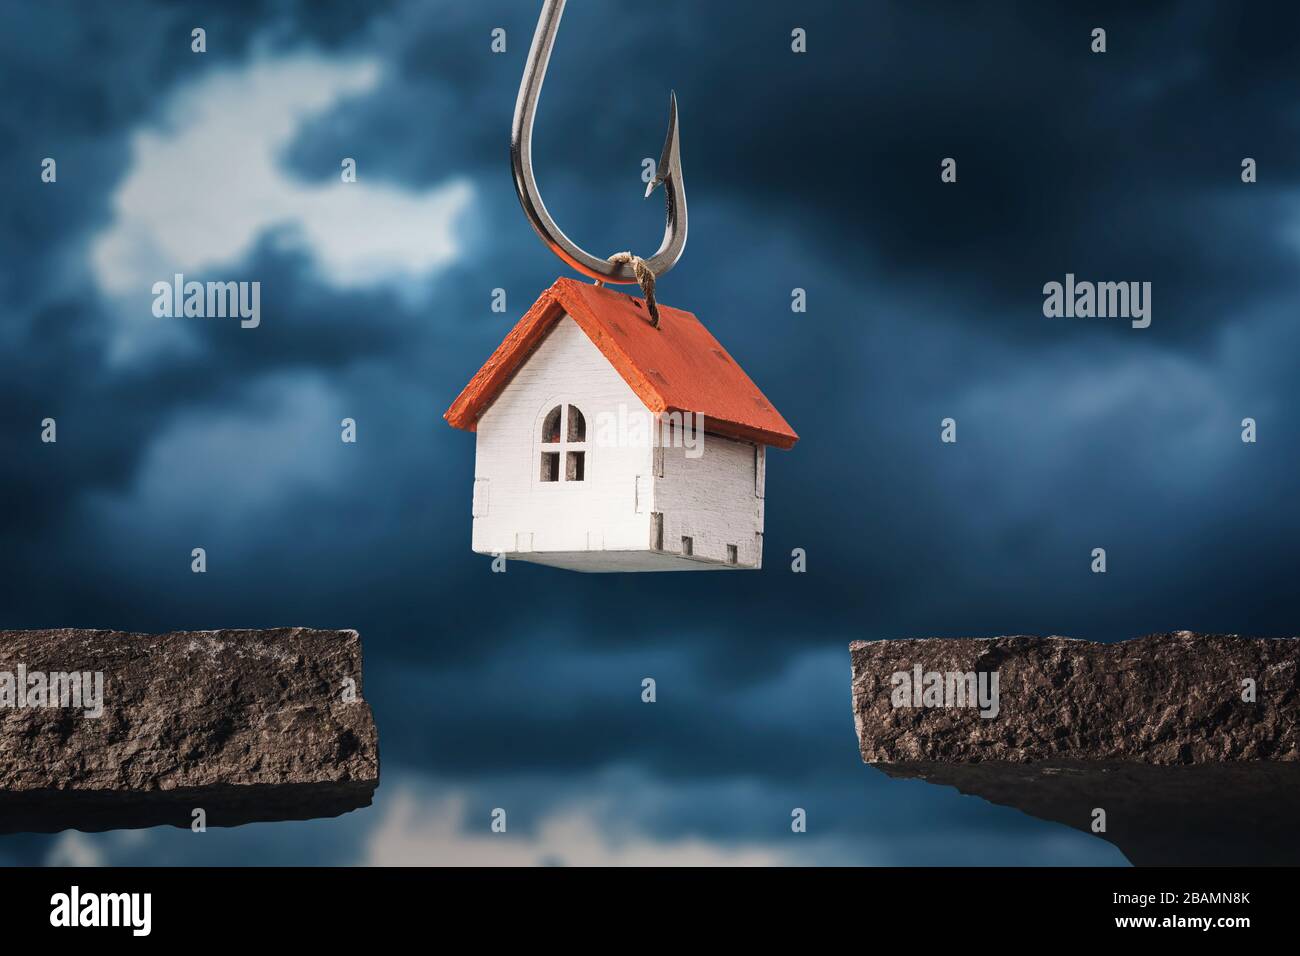 A toy house on a hook hanging over a precipice. Debt concept Stock Photo